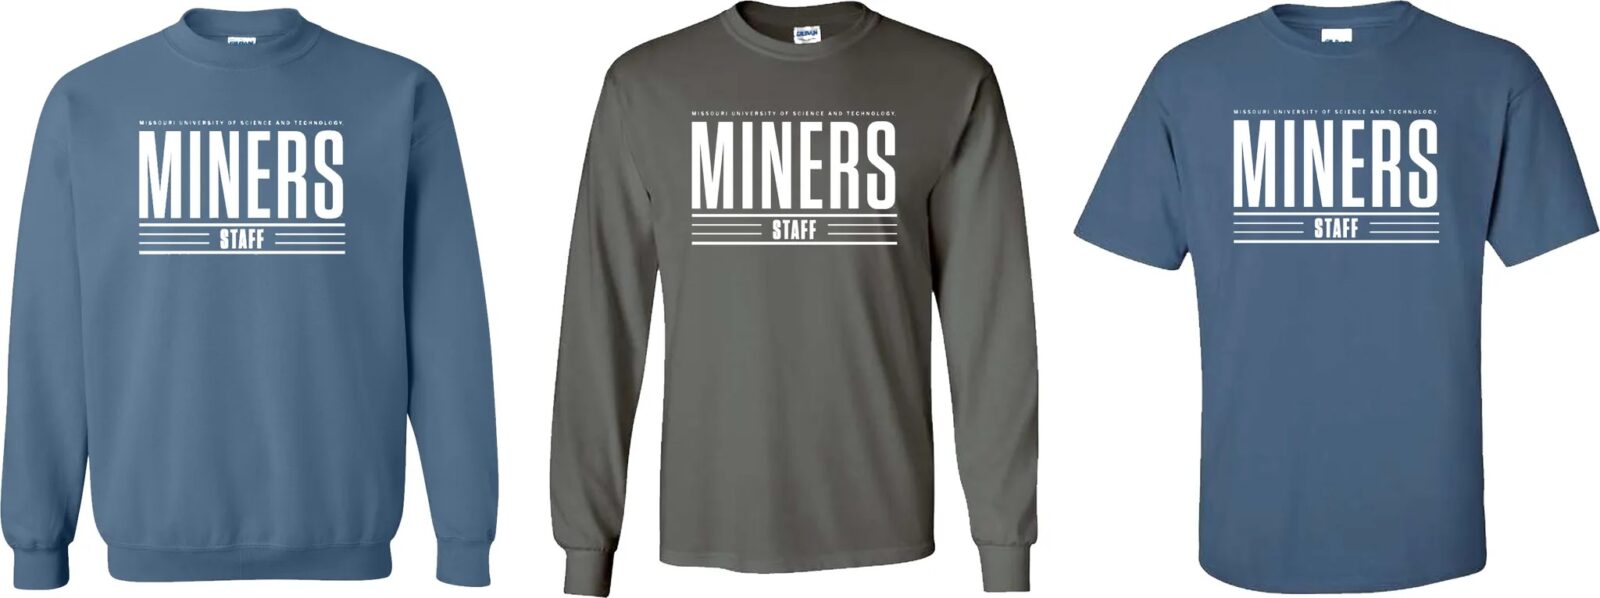 Sweatshirt and T-shirts with Miners Staff design